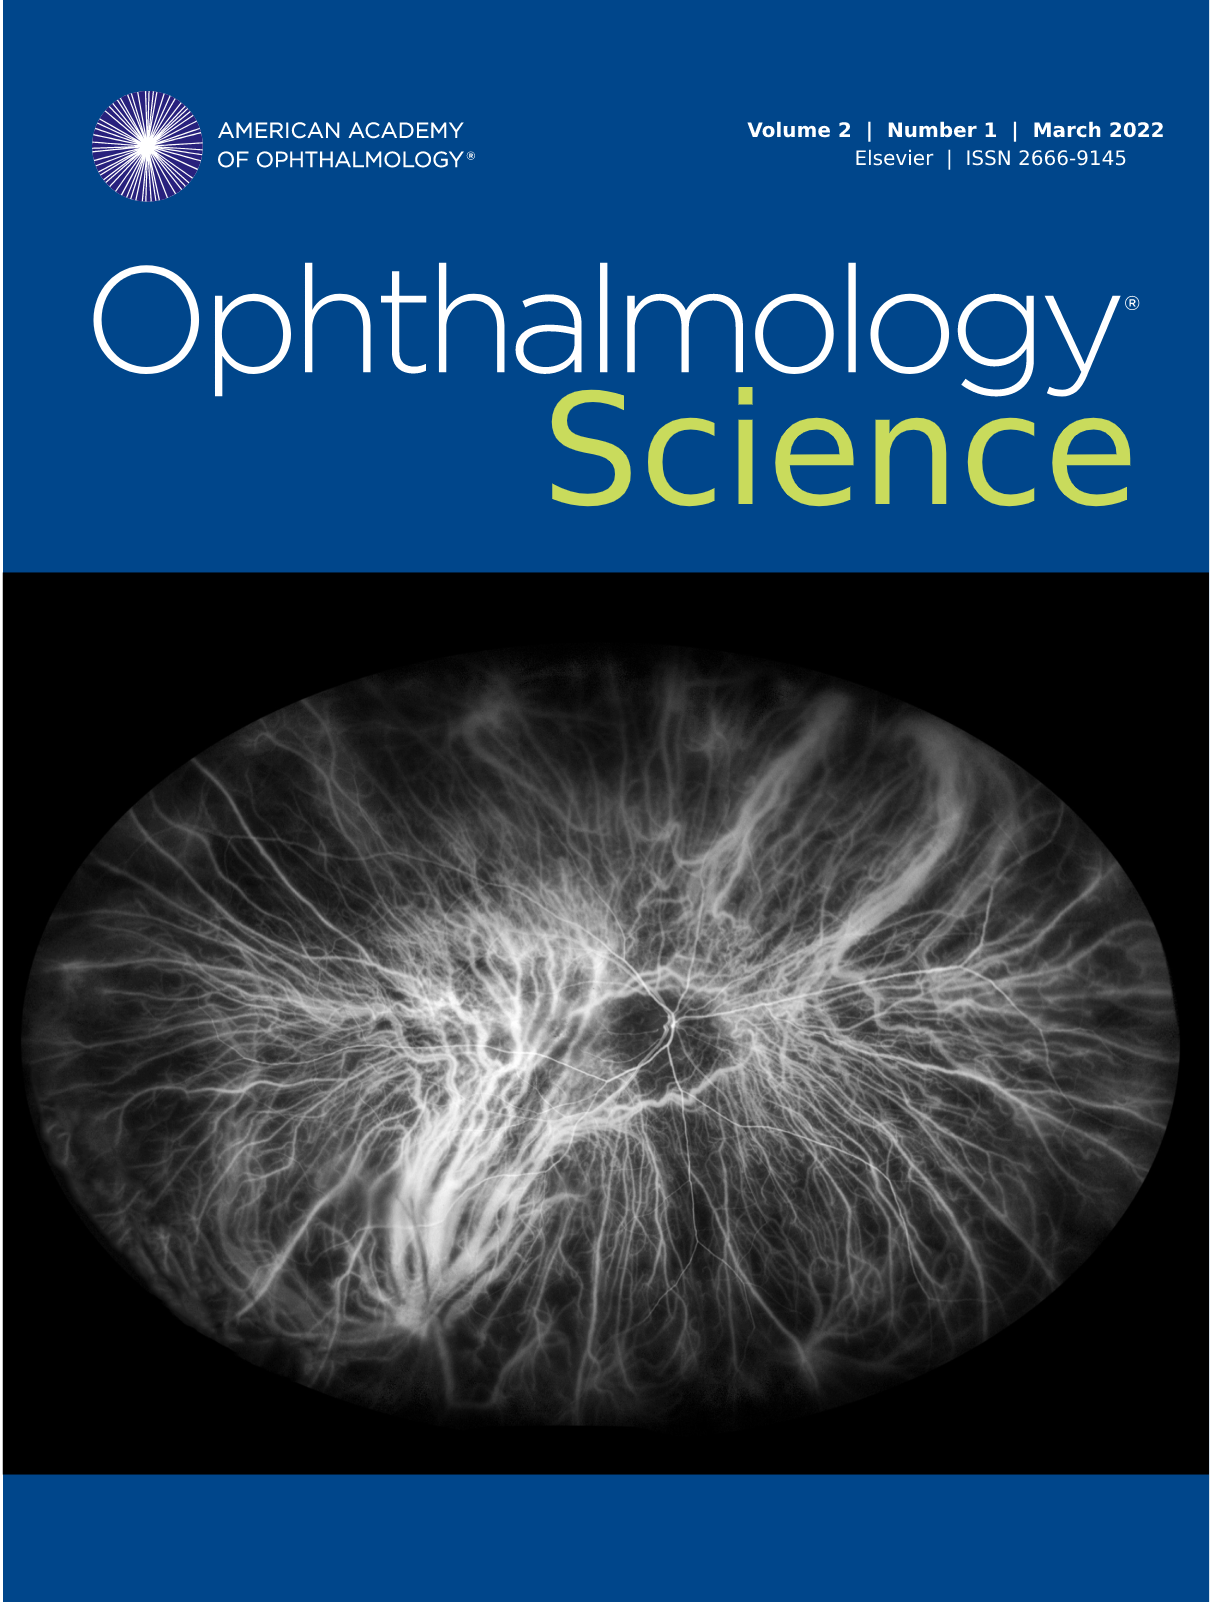 Ophthalmology Science March 2022 image